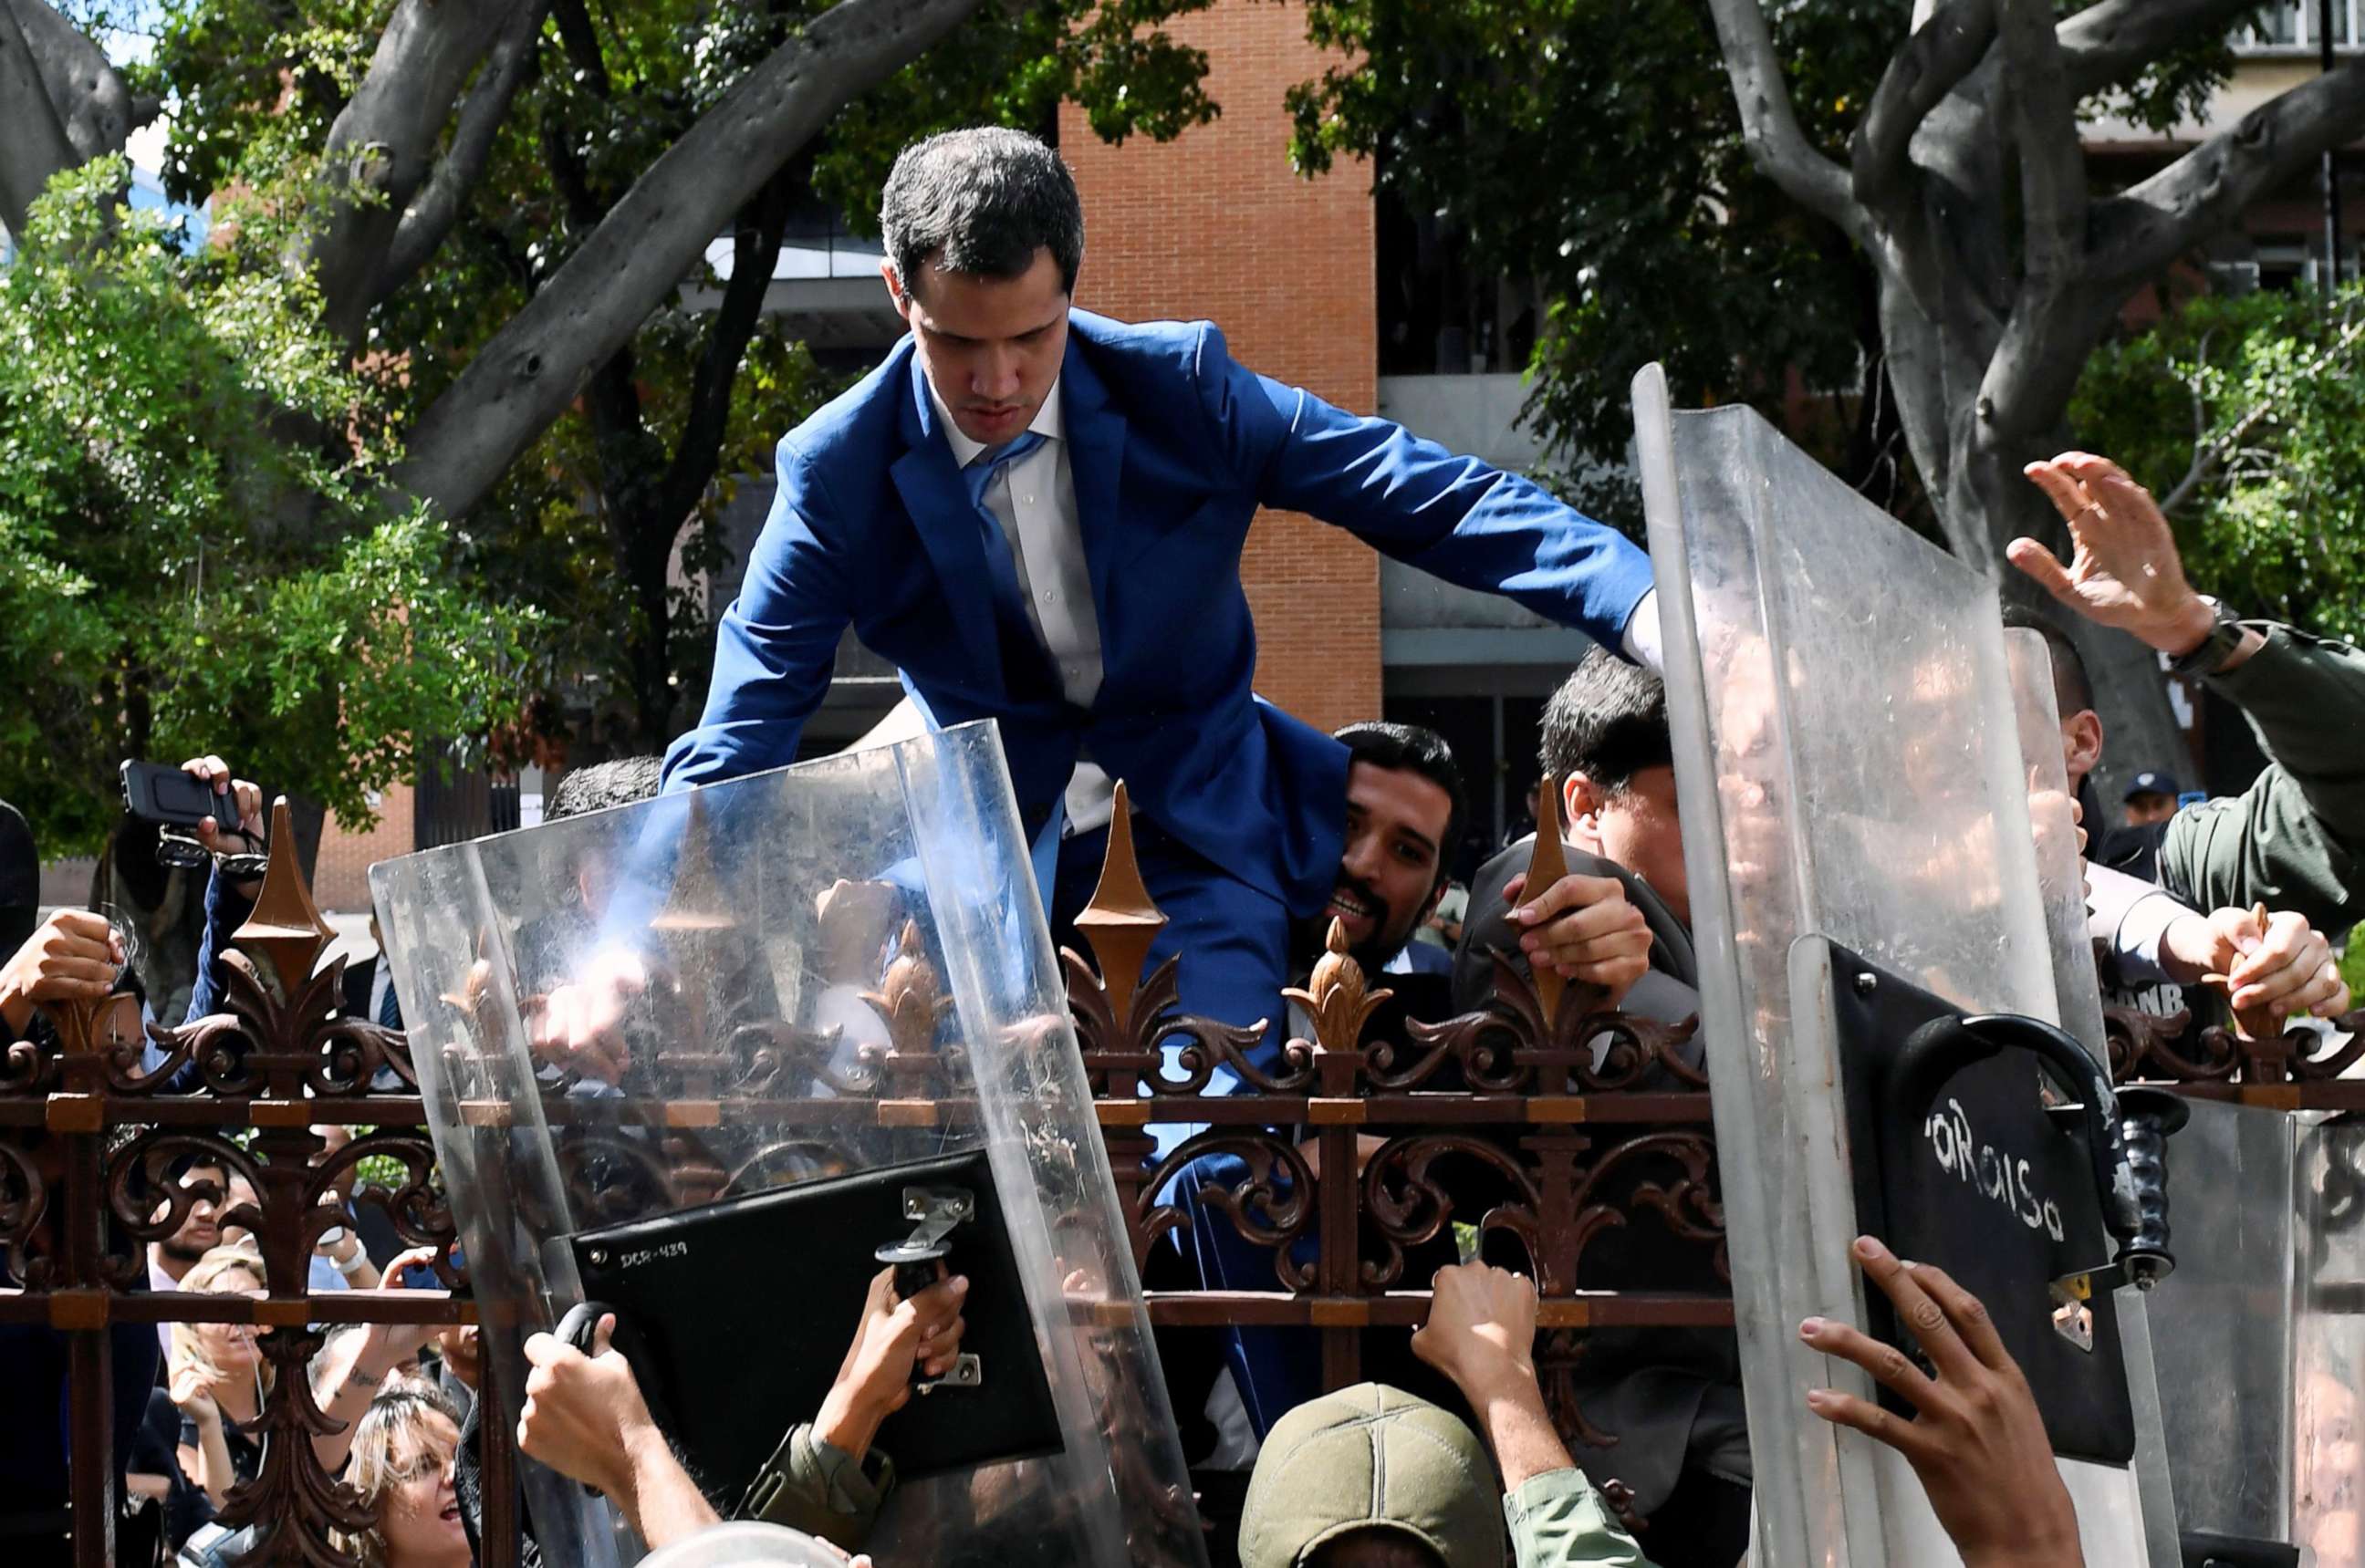 PHOTO: TVenezuelan opposition leader Juan Guaido is helped to climb a fence in an attempt to reach the National Assembly building in Caracas, on Jan. 5, 2020. Guaido and fellow opposition lawmakers were blocked from entering the National Assembly.